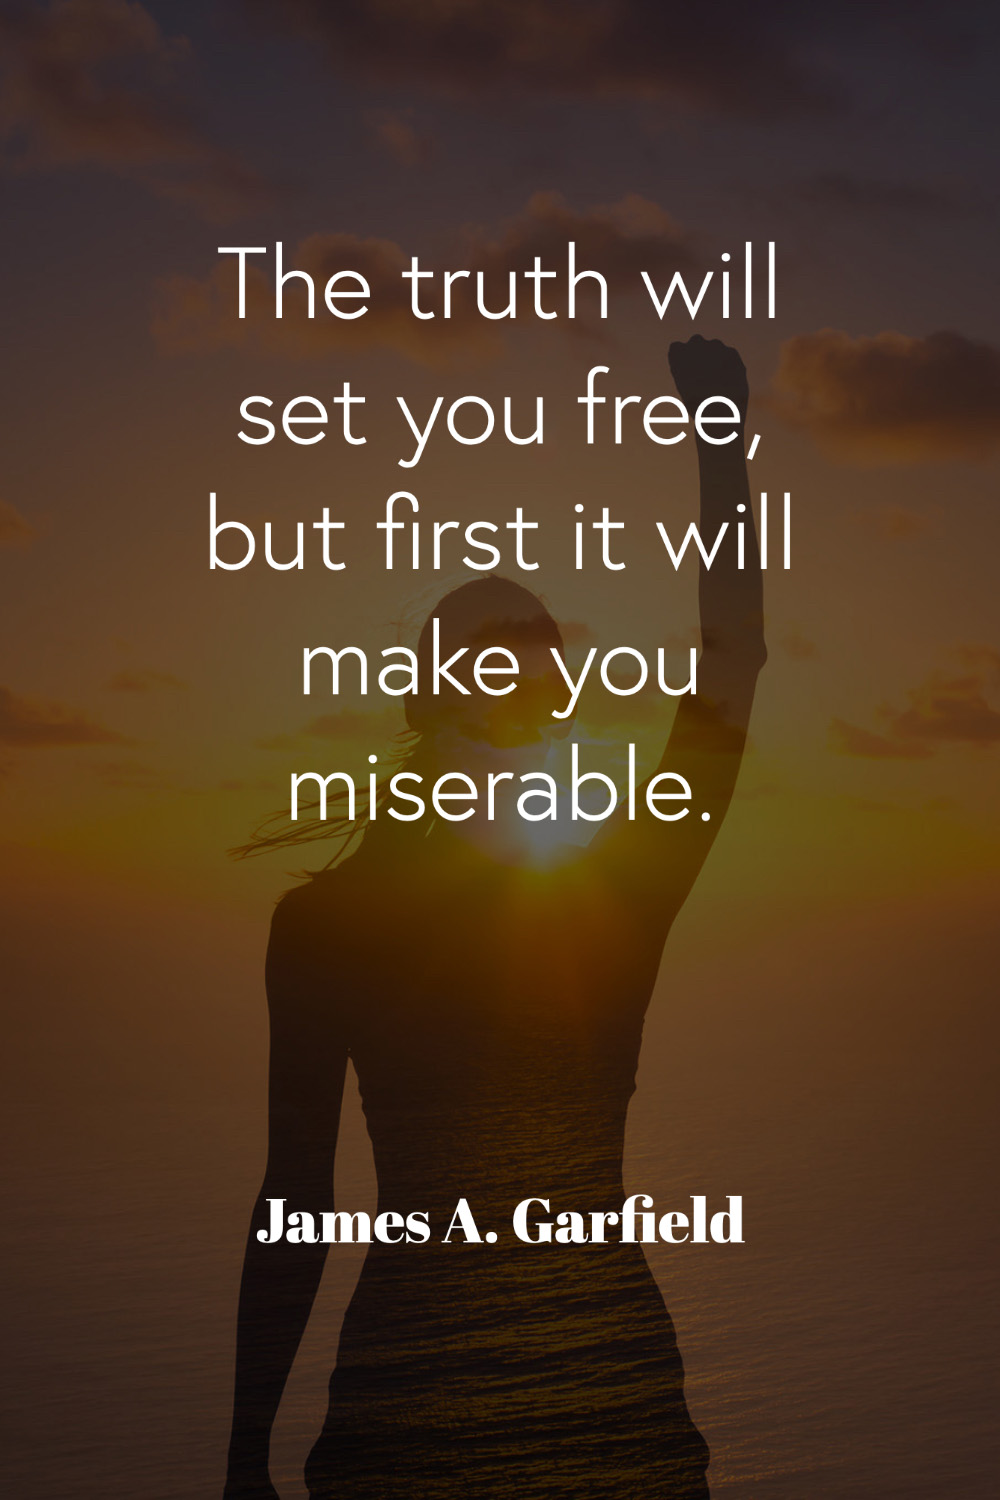 Quote by James A. Garfield